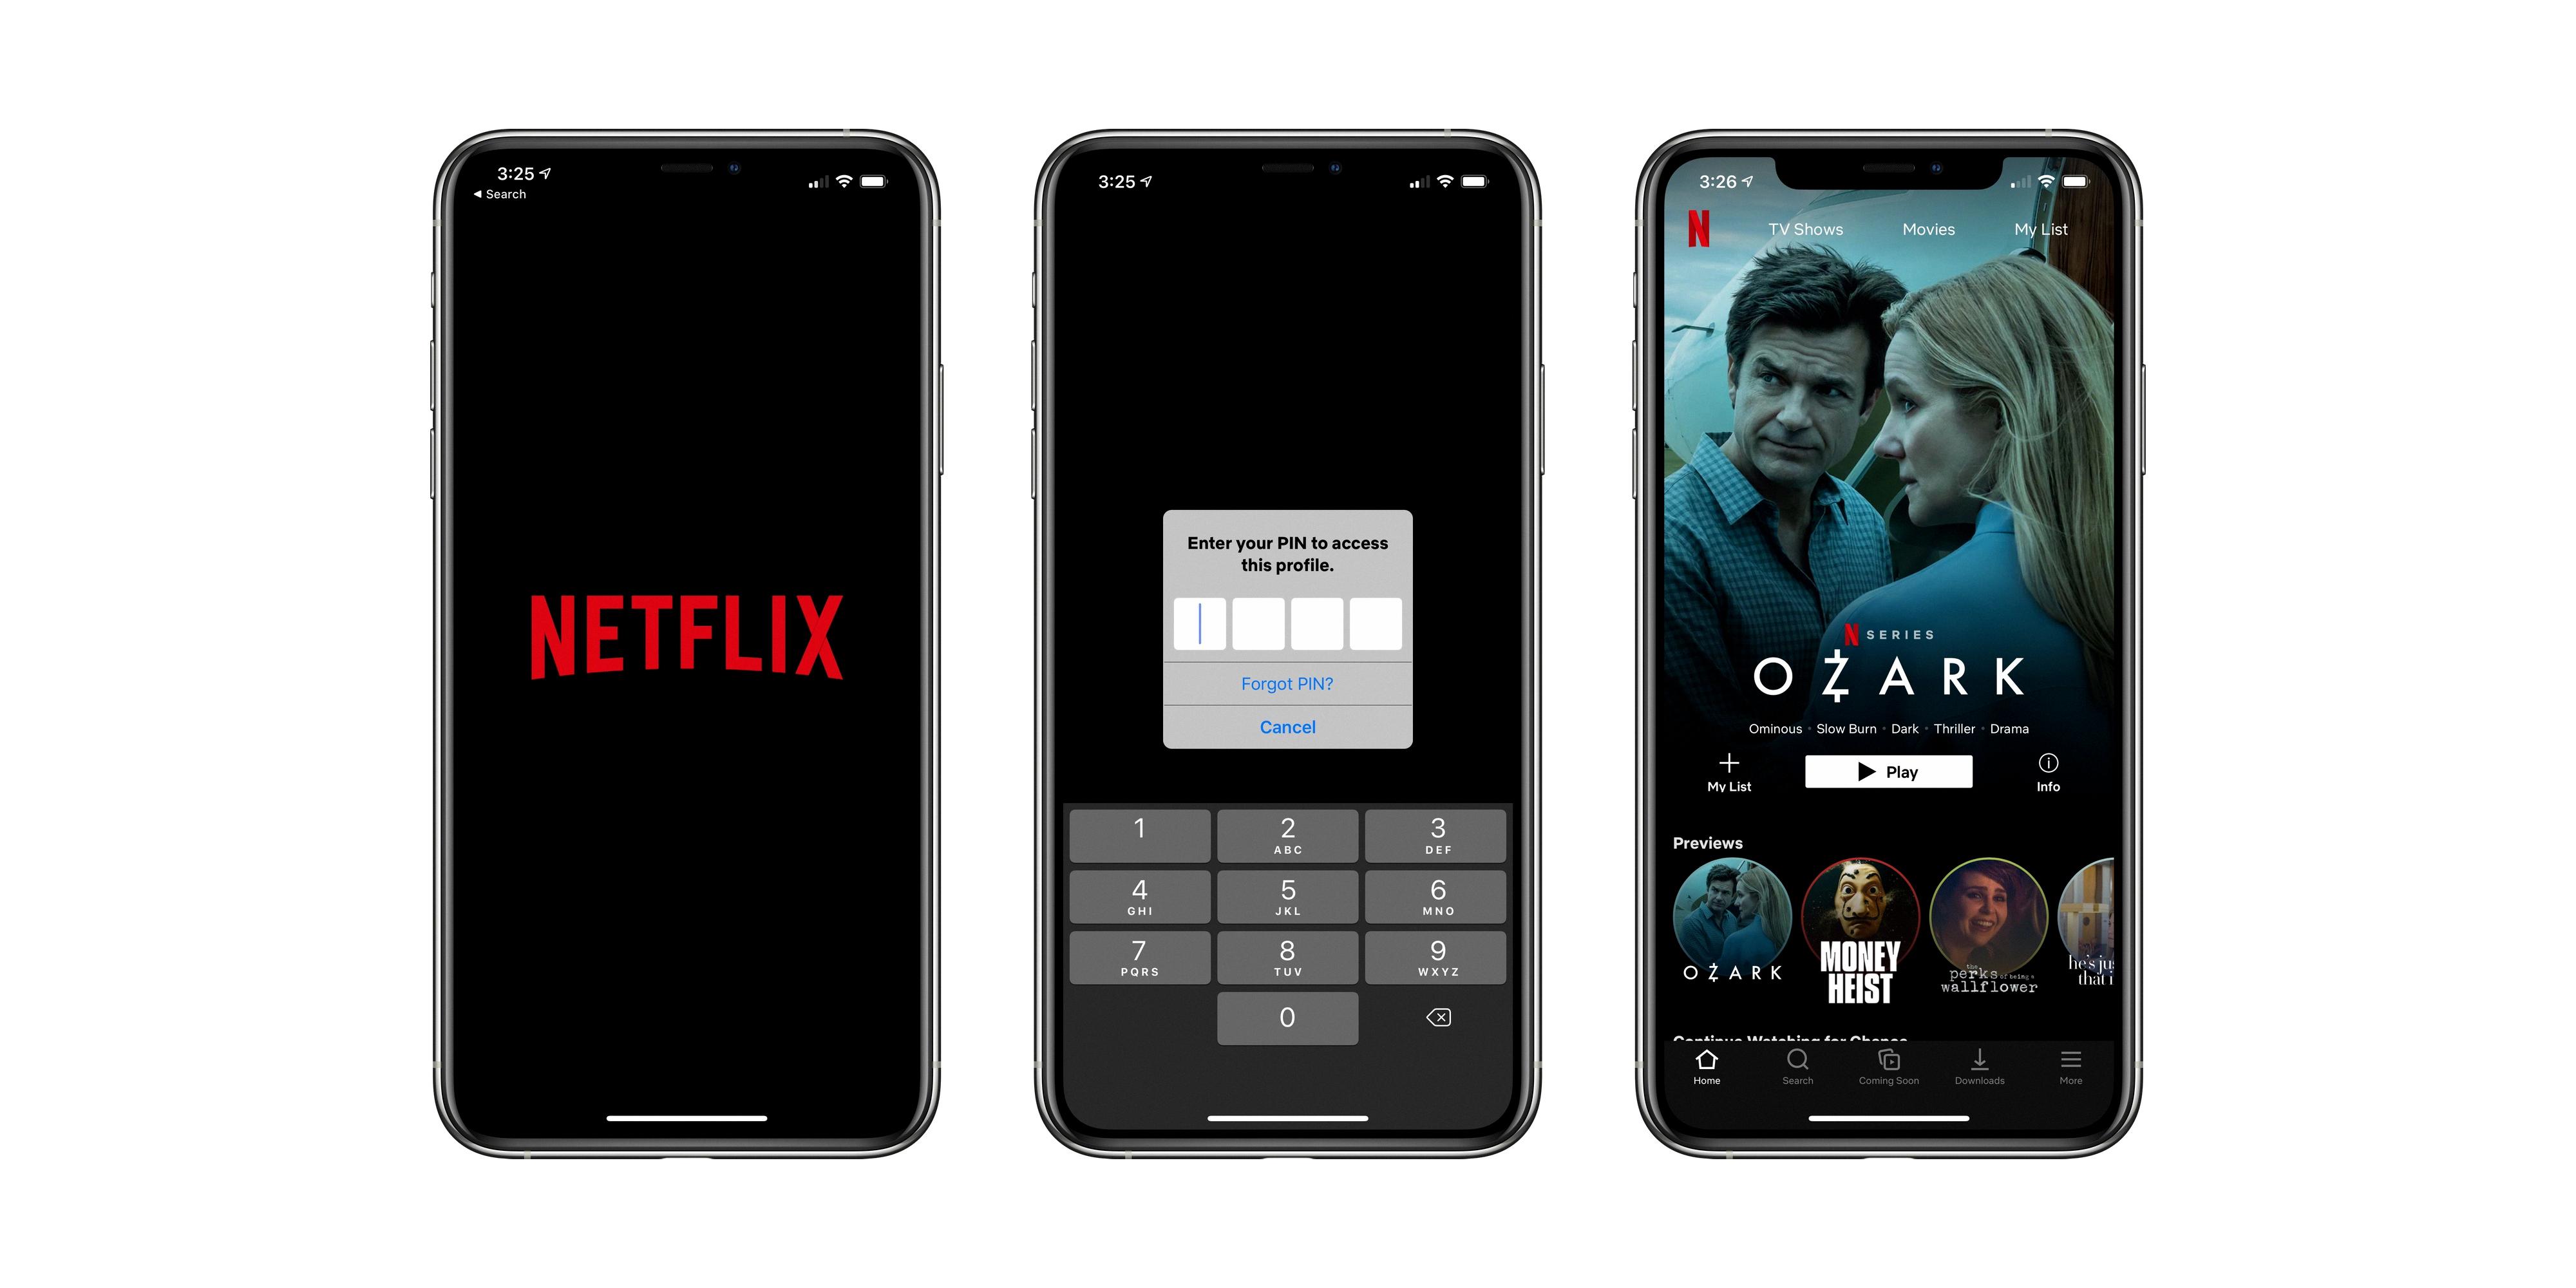 How to Lock Your Netflix Profile On iPhone? 17